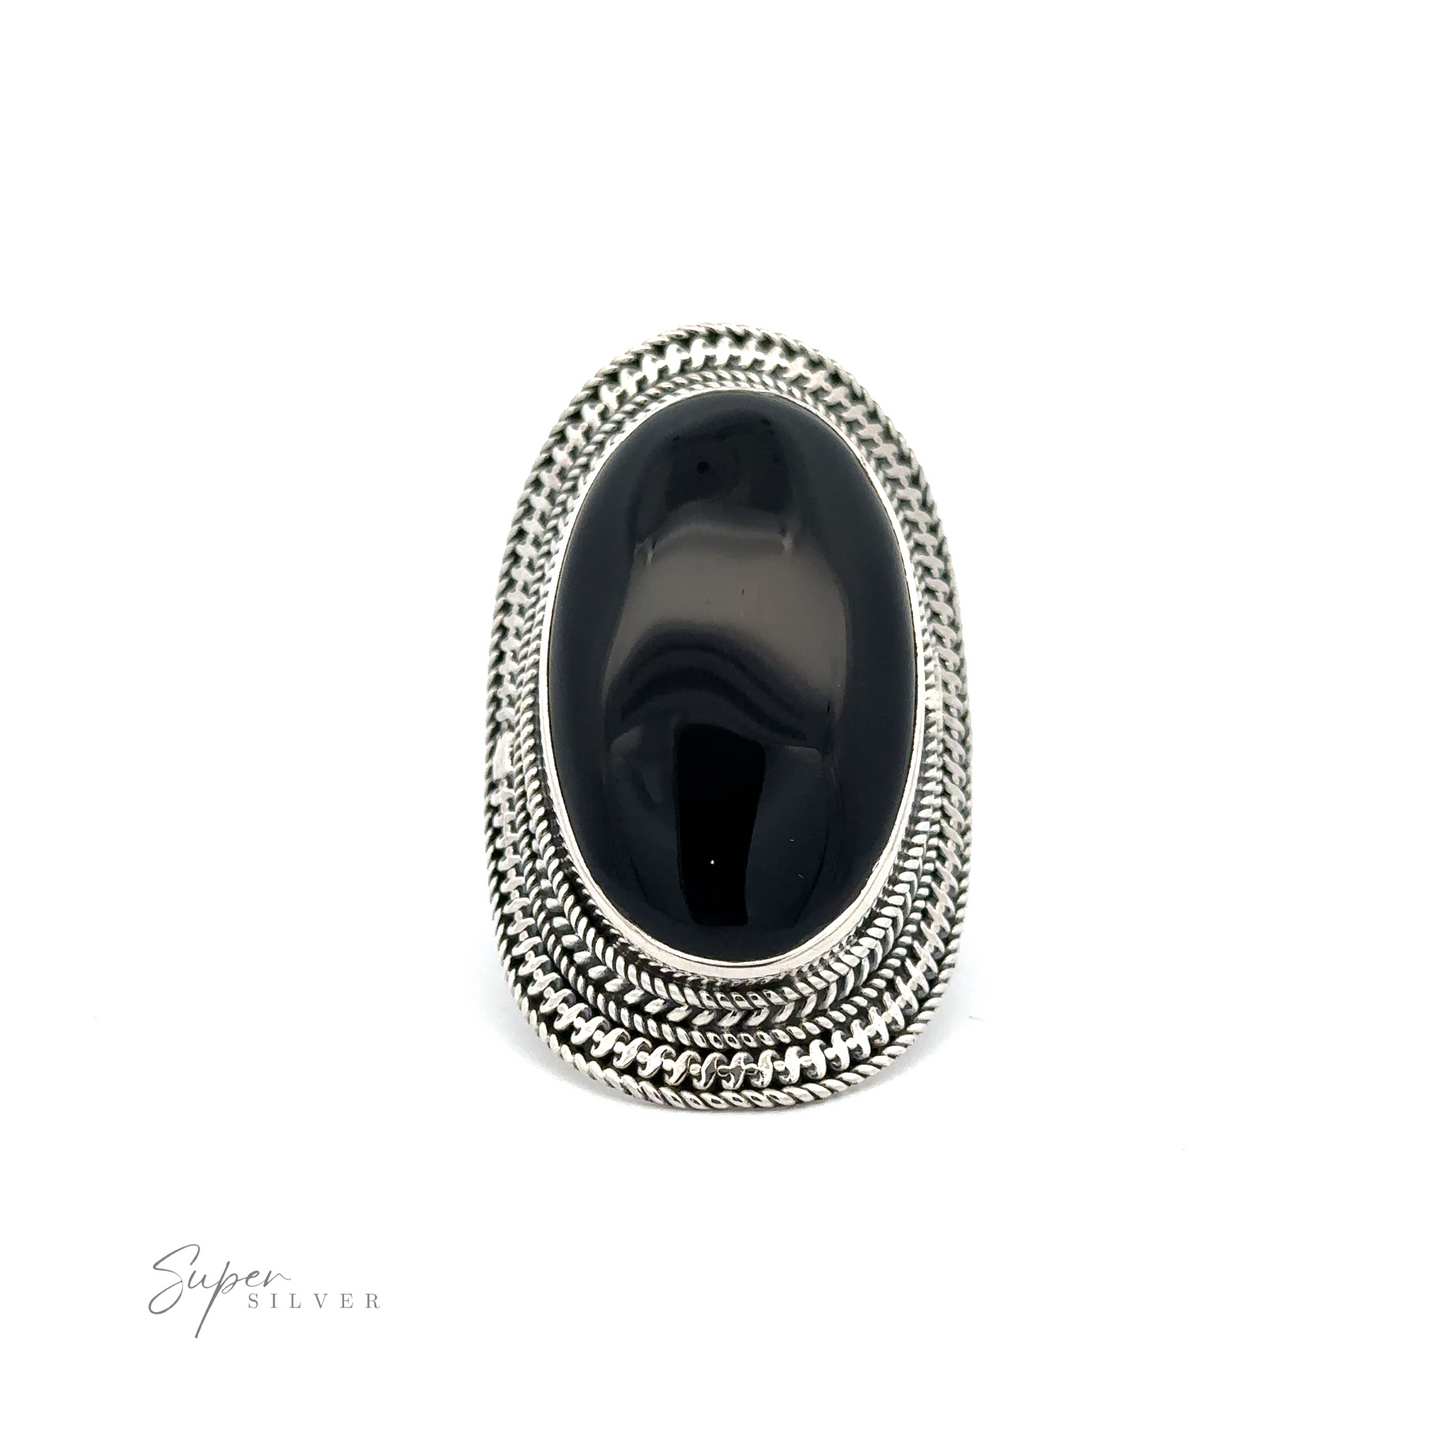 
                  
                    An **Large Oval Shield Gemstone Ring** set in a silver ring with intricate detailing, displayed against a plain white background, exudes a touch of bohemian flair.
                  
                